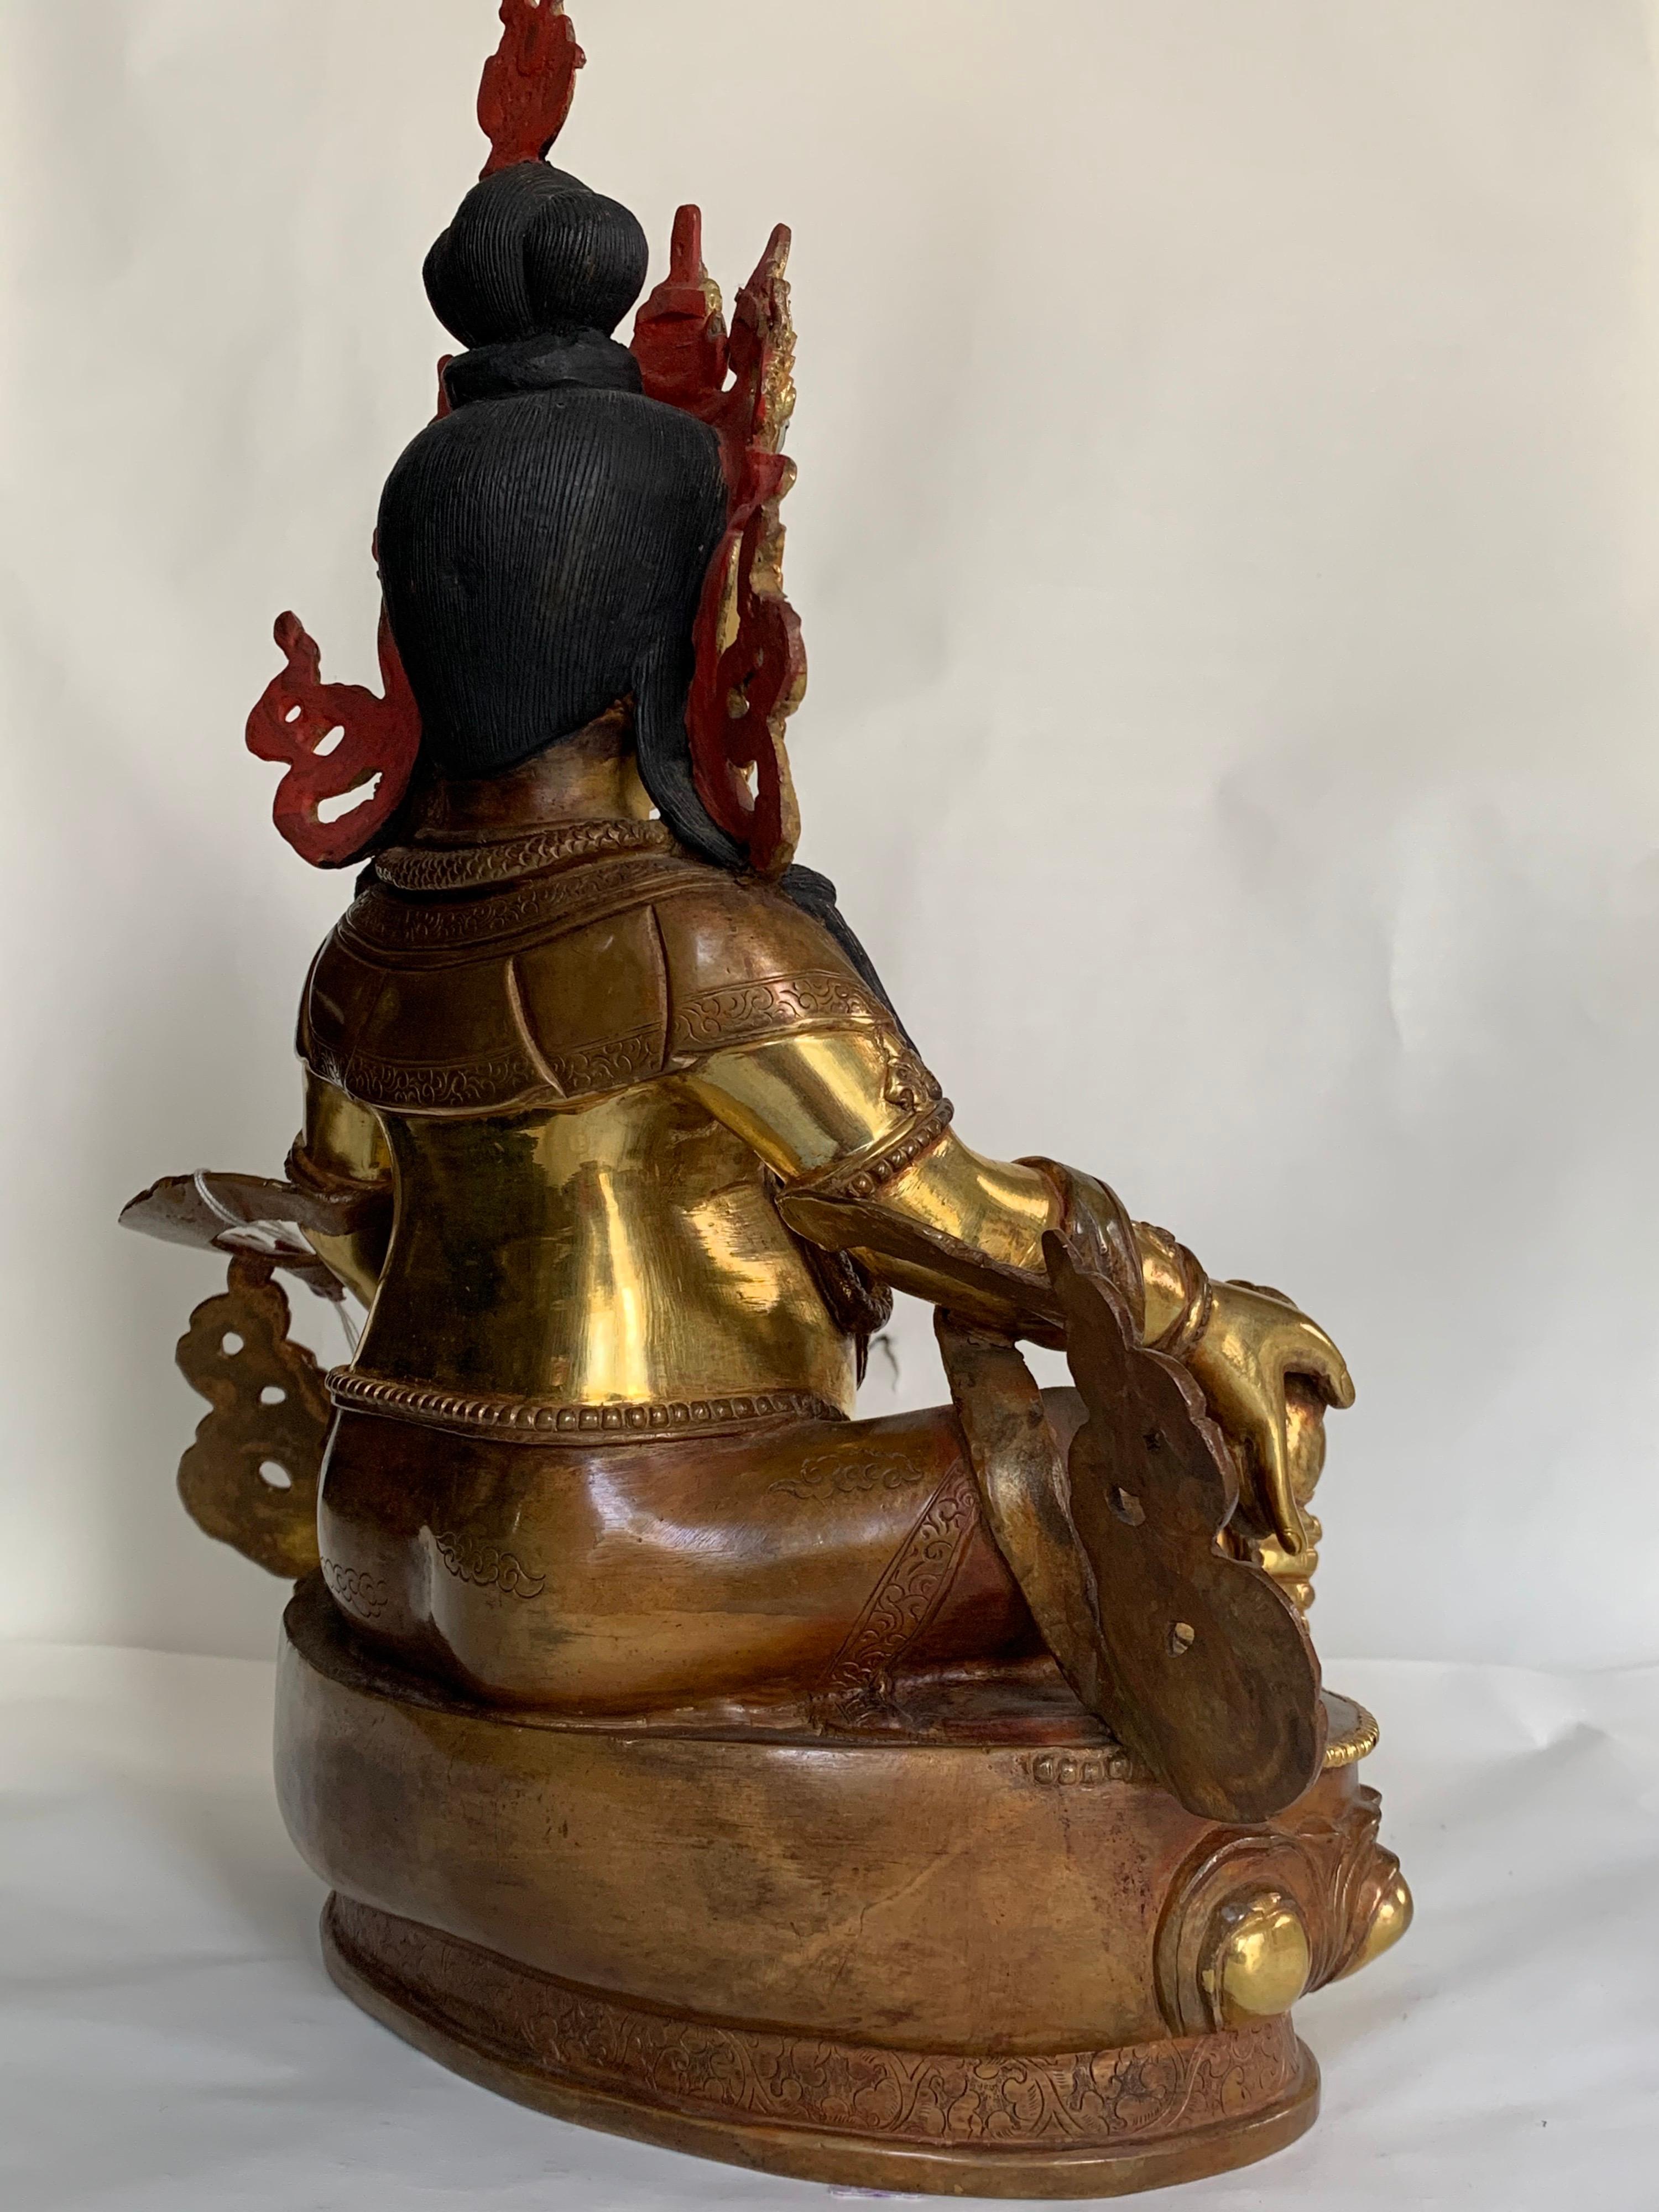 This statue is handcrafted by lost wax process which is one of the ancient process of metal craft. Kubera is seated in easy pose with one hand holding a jewel and another a mongoose. Kubera is also known as Vaishravana, the deity of wealth. He has a